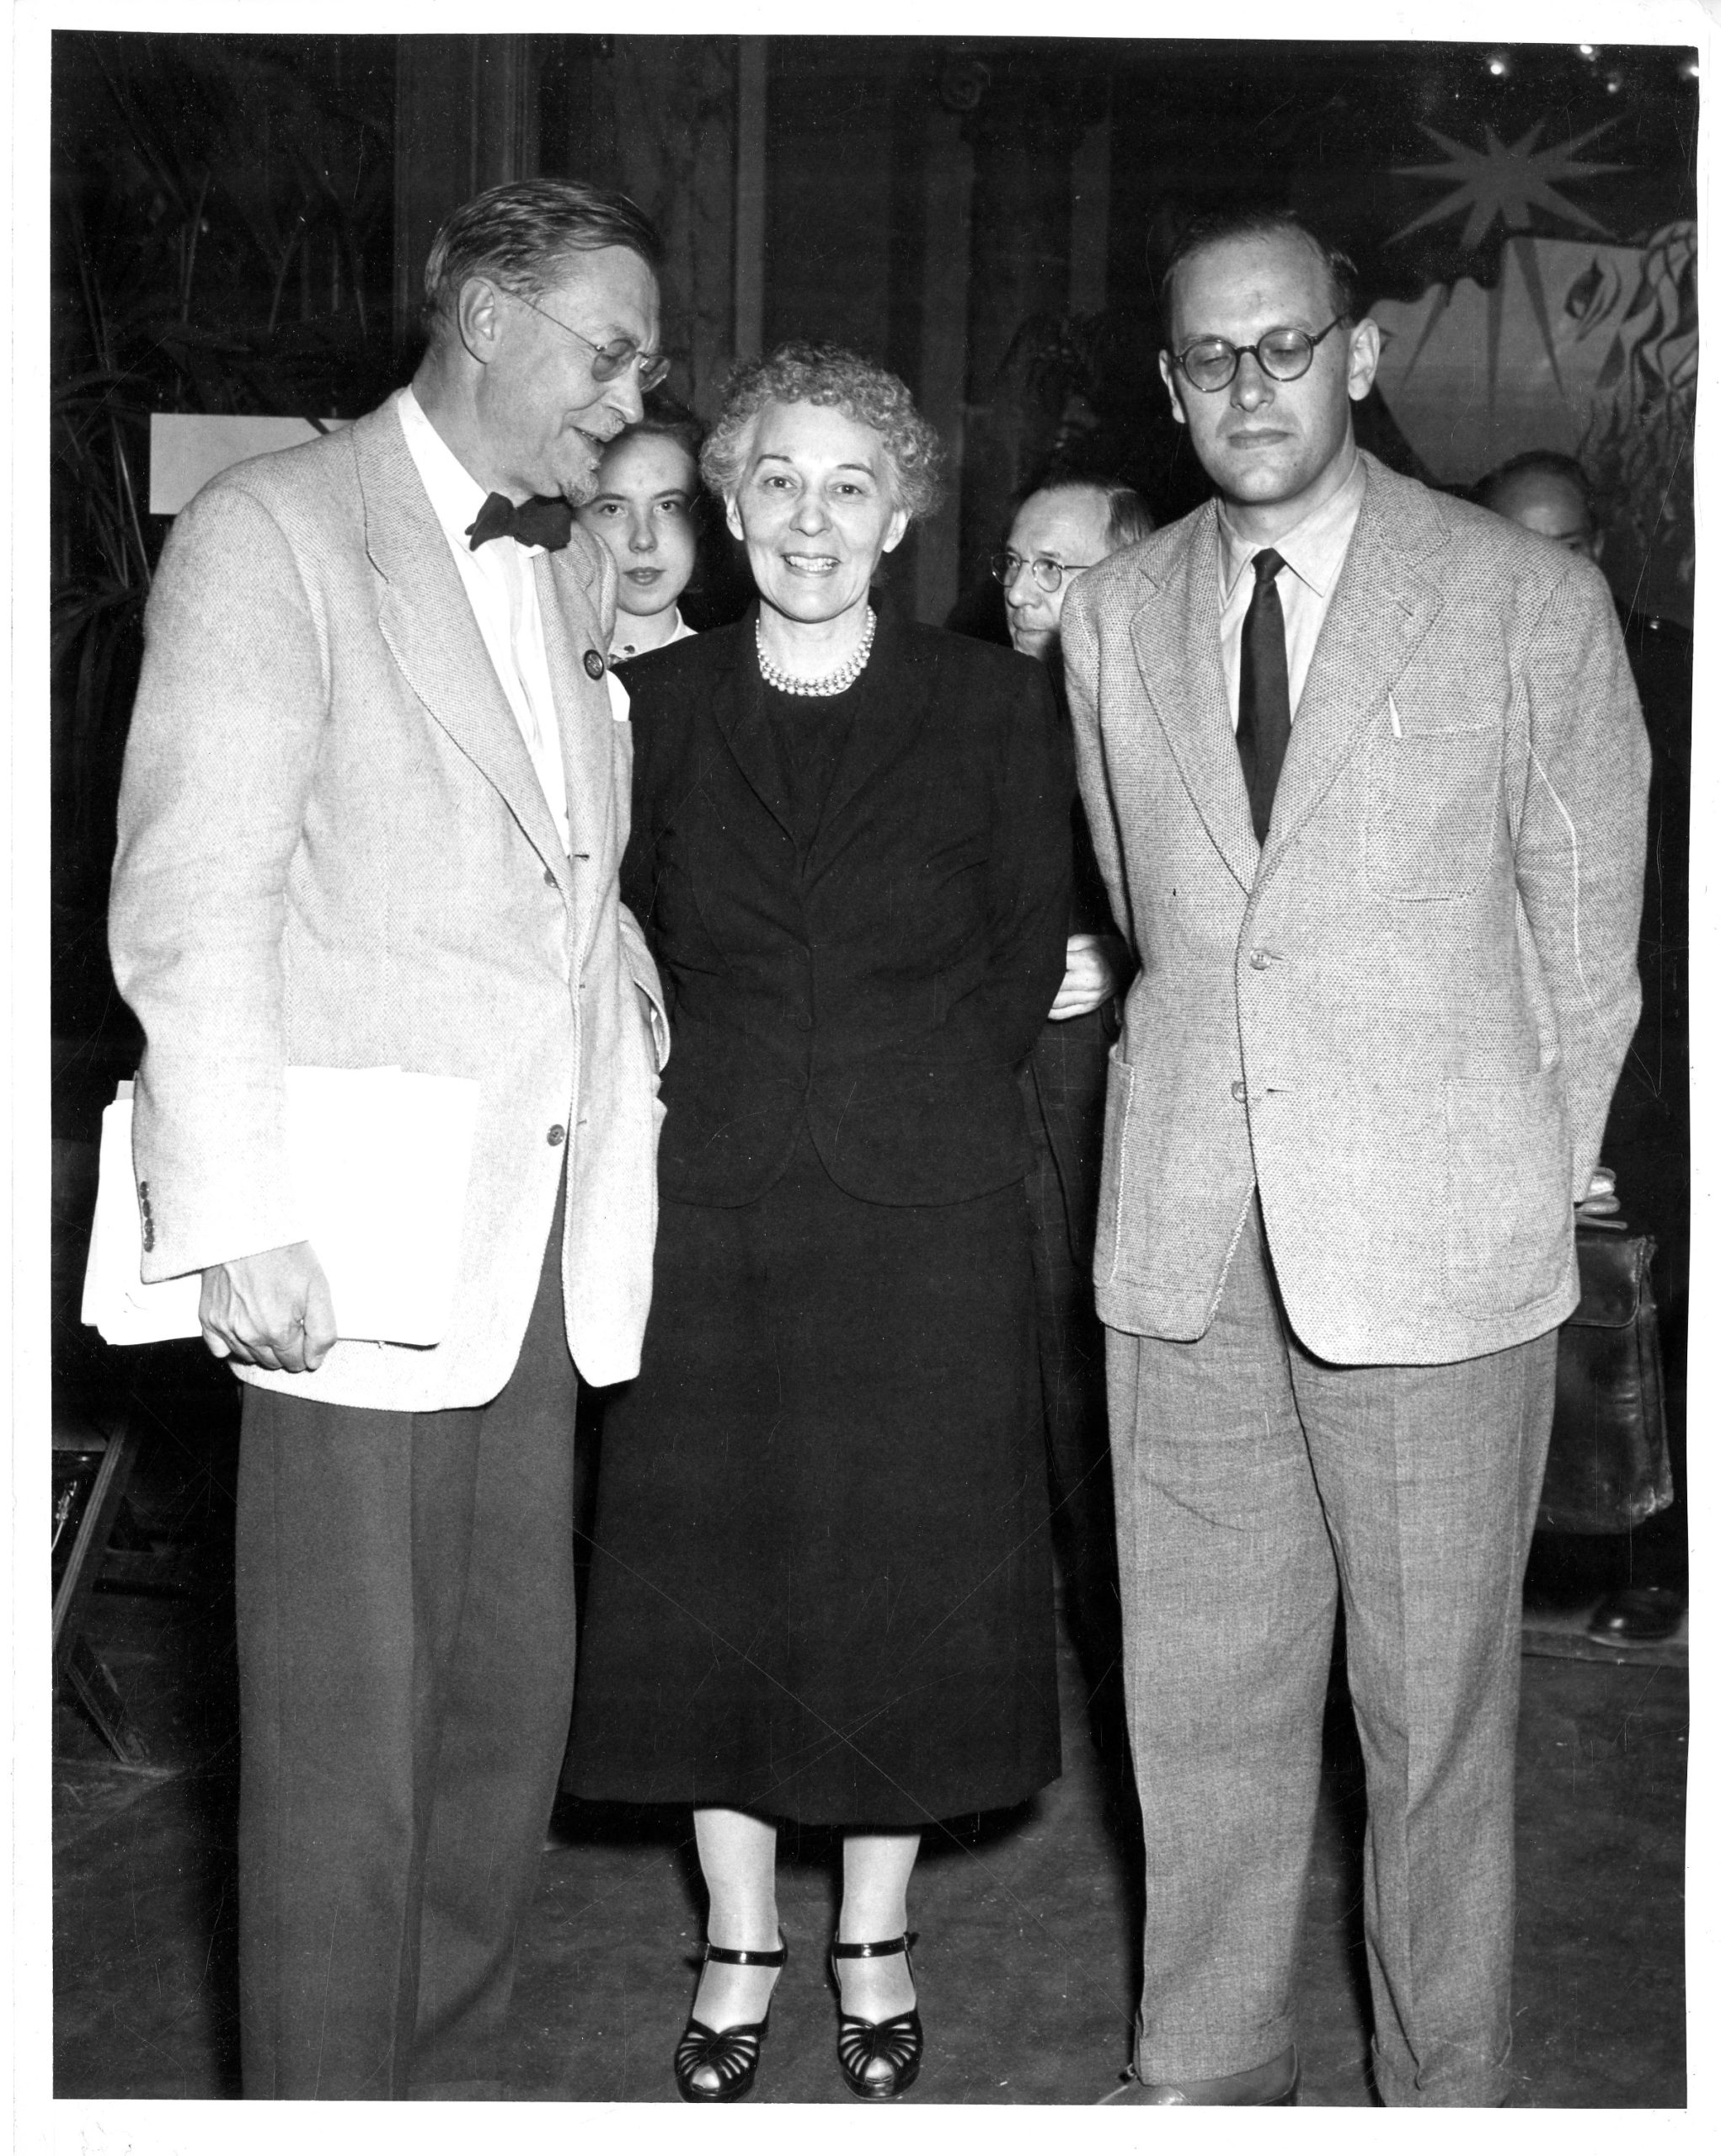 Dr. Howard Hanson (U.S.A.), Mrs. Charles W. Tillett (wife of Charles Walter Tillett (U.S.A.), attorney and supporter of the United Nations), and Professor Vittore Branca (Italy). UNESCO Fourth General Conference, Paris, September 19th/October 5th, 1949. Photo by the United States Information Service. Howard Hanson Collection.